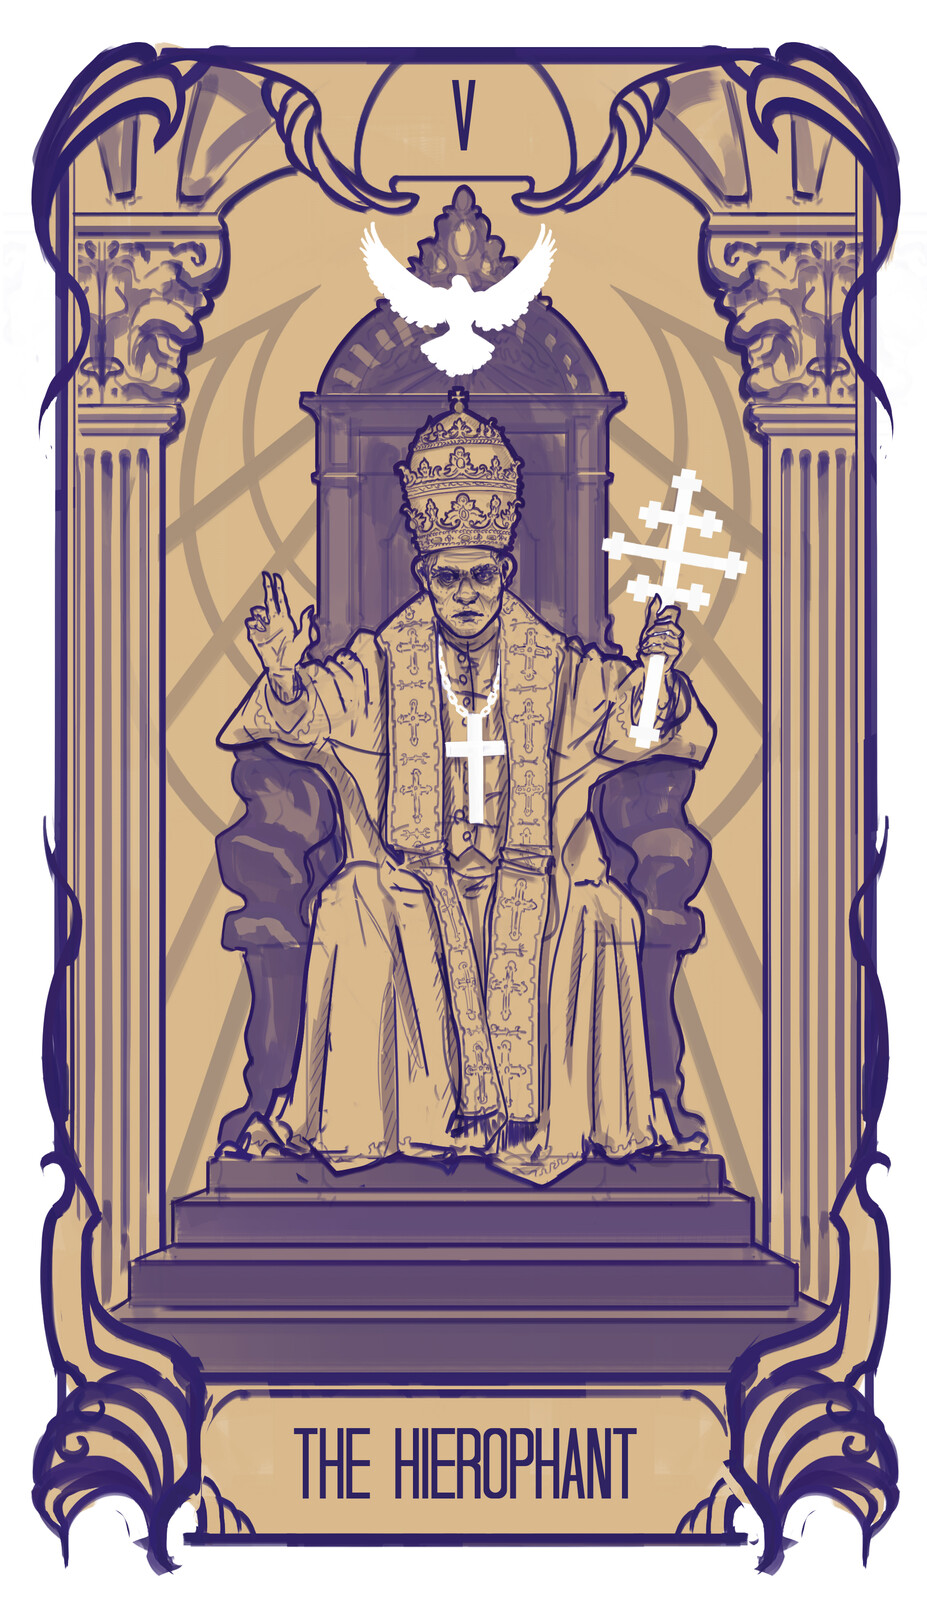 5. The Hierophant